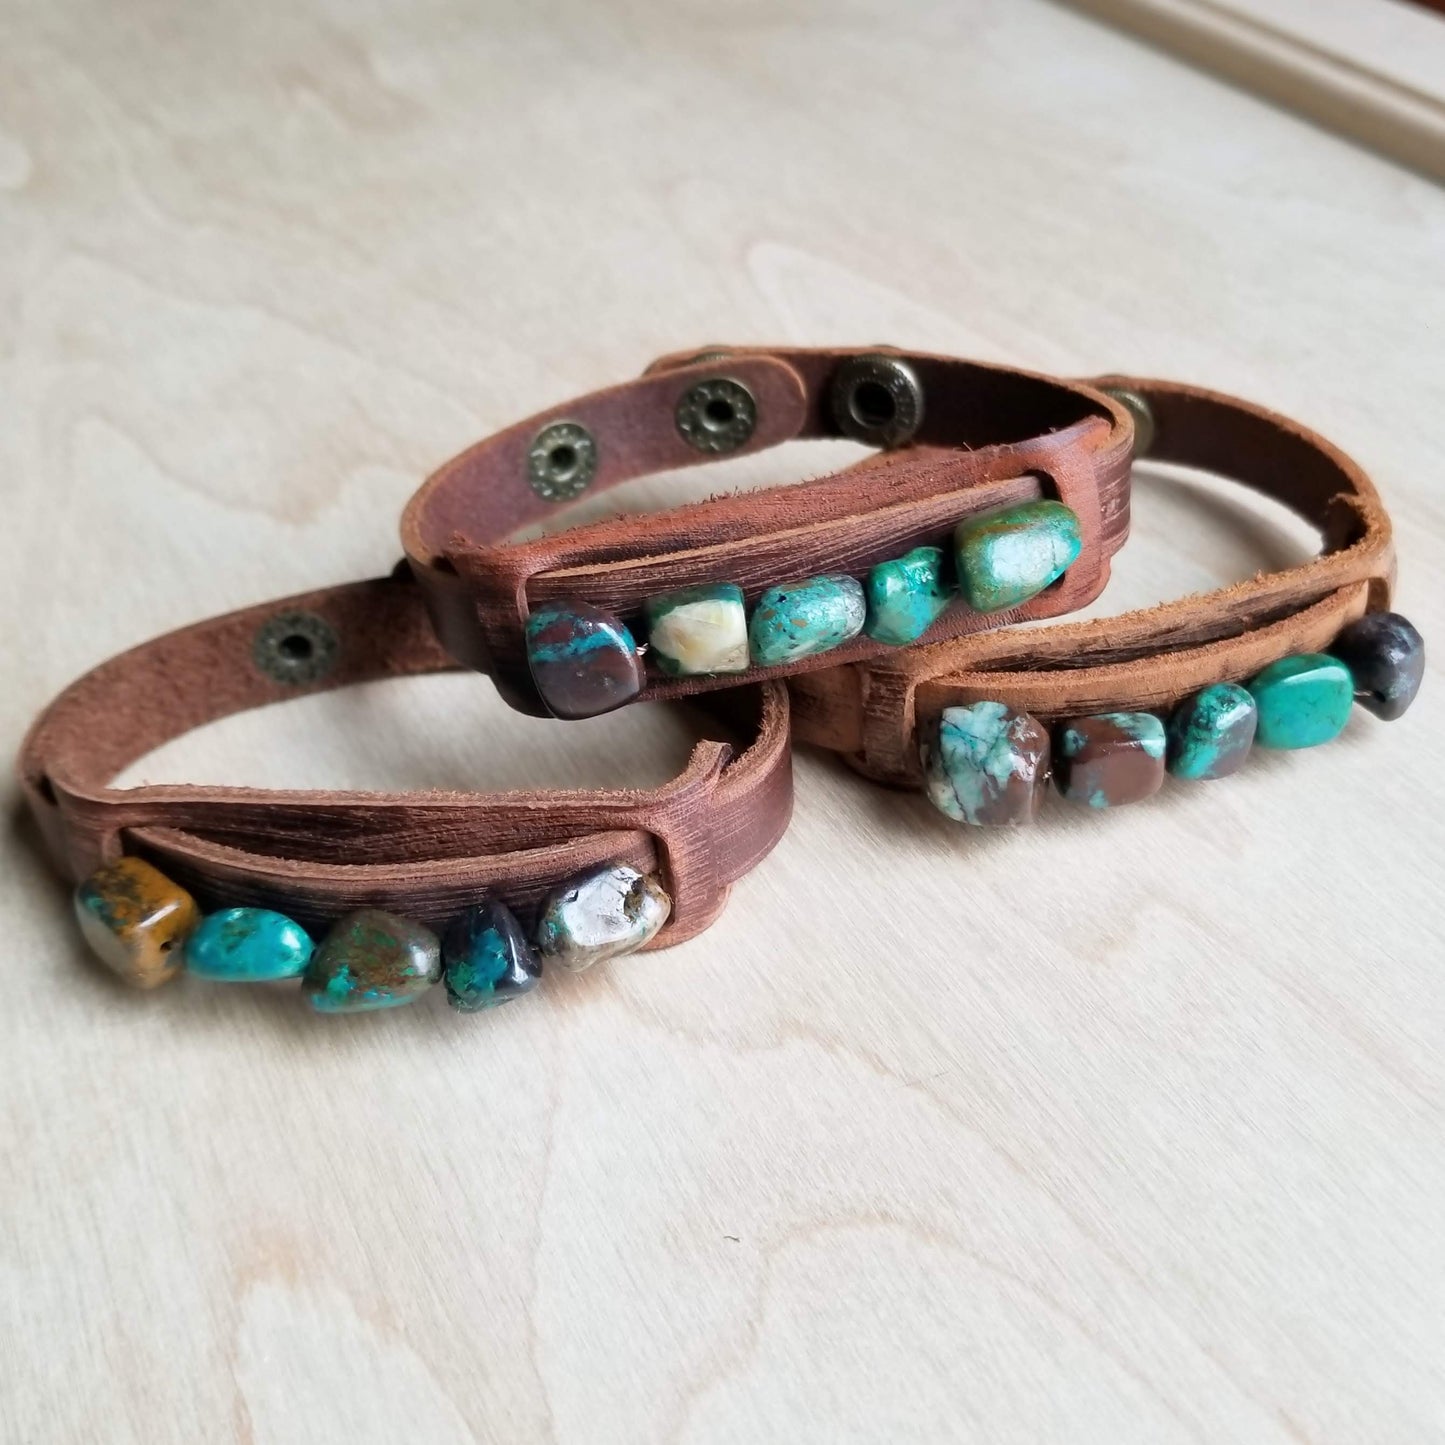 Dusty Leather Narrow Cuff with African Turquoise Chunks 006q - The Jewelry Junkie